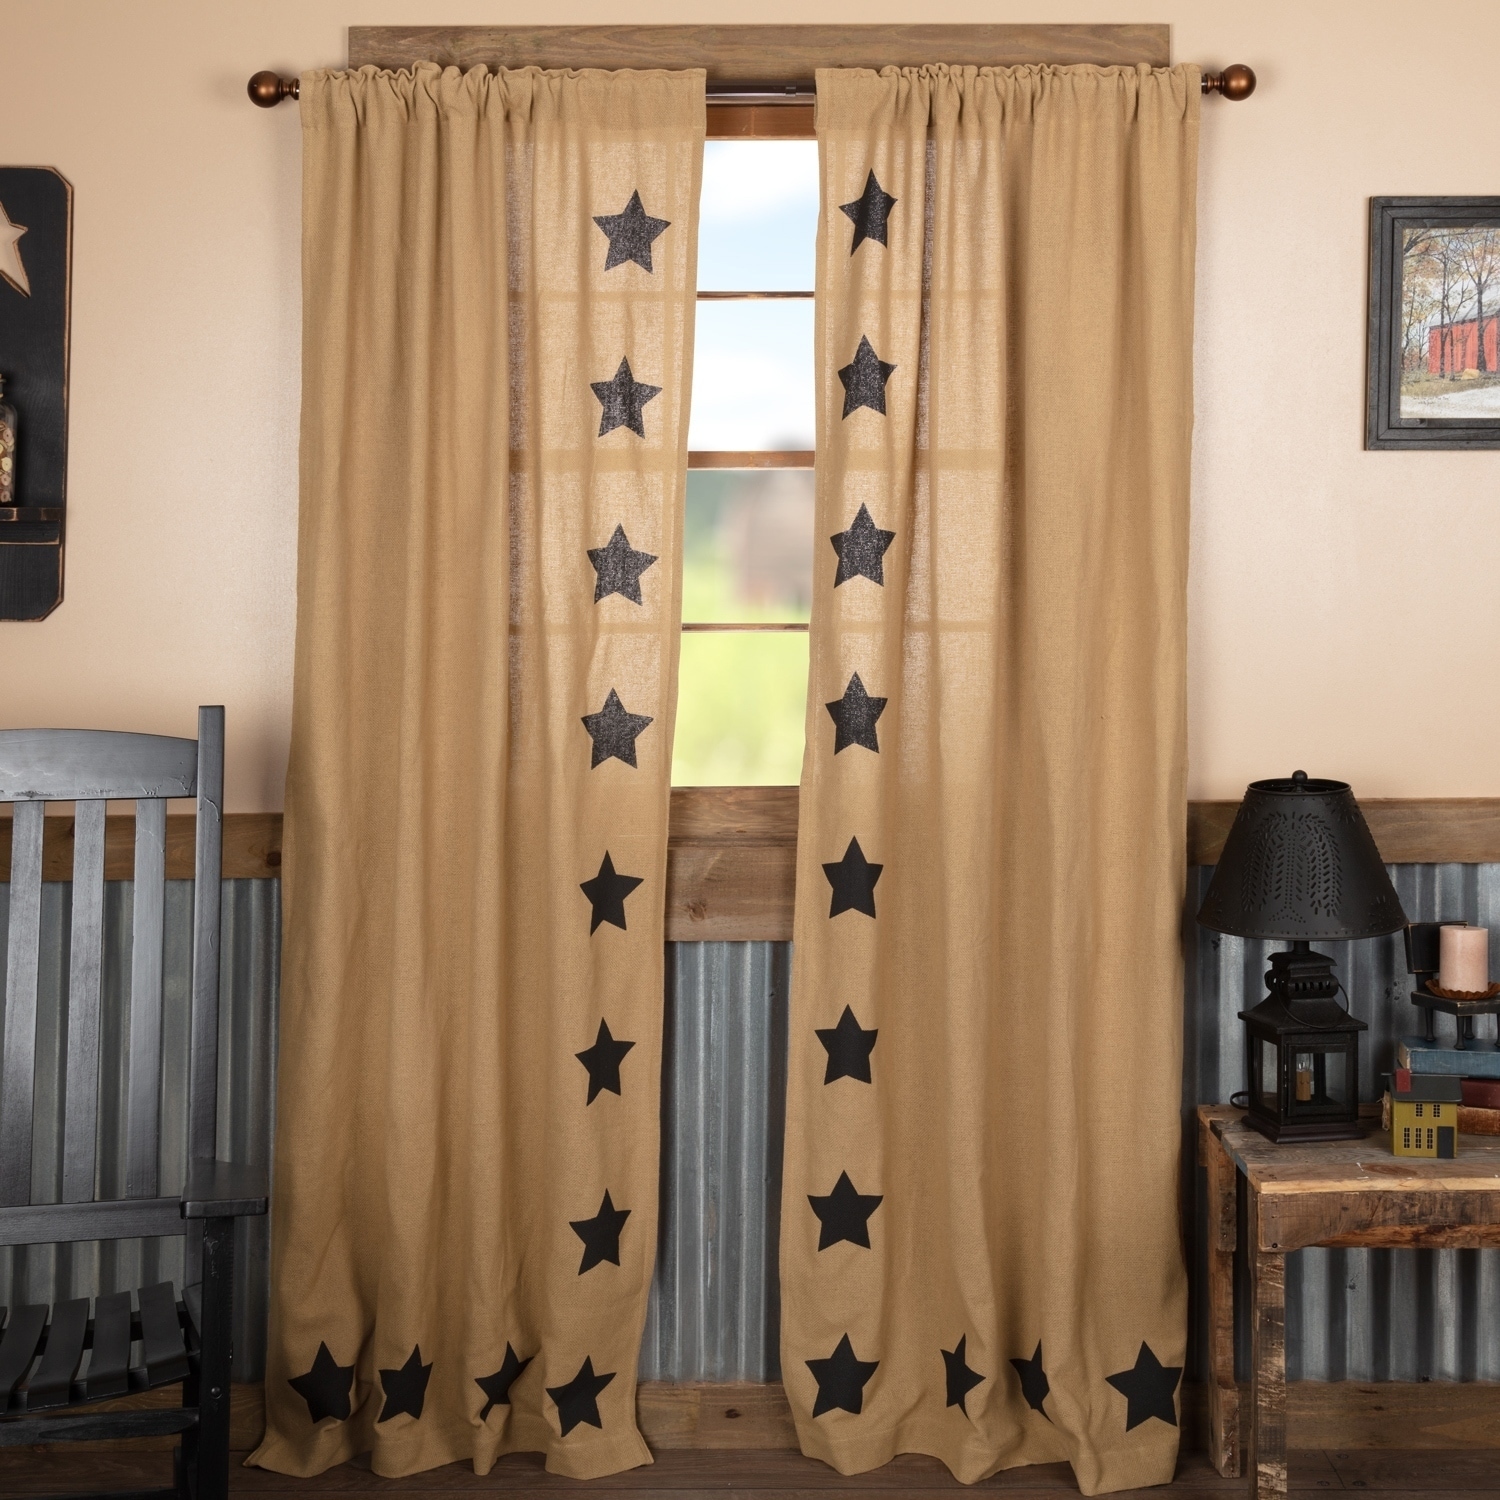 Olivia's Heartland country Tan Deluxe BURLAP Stencil STAR Panel curtains 36x63 